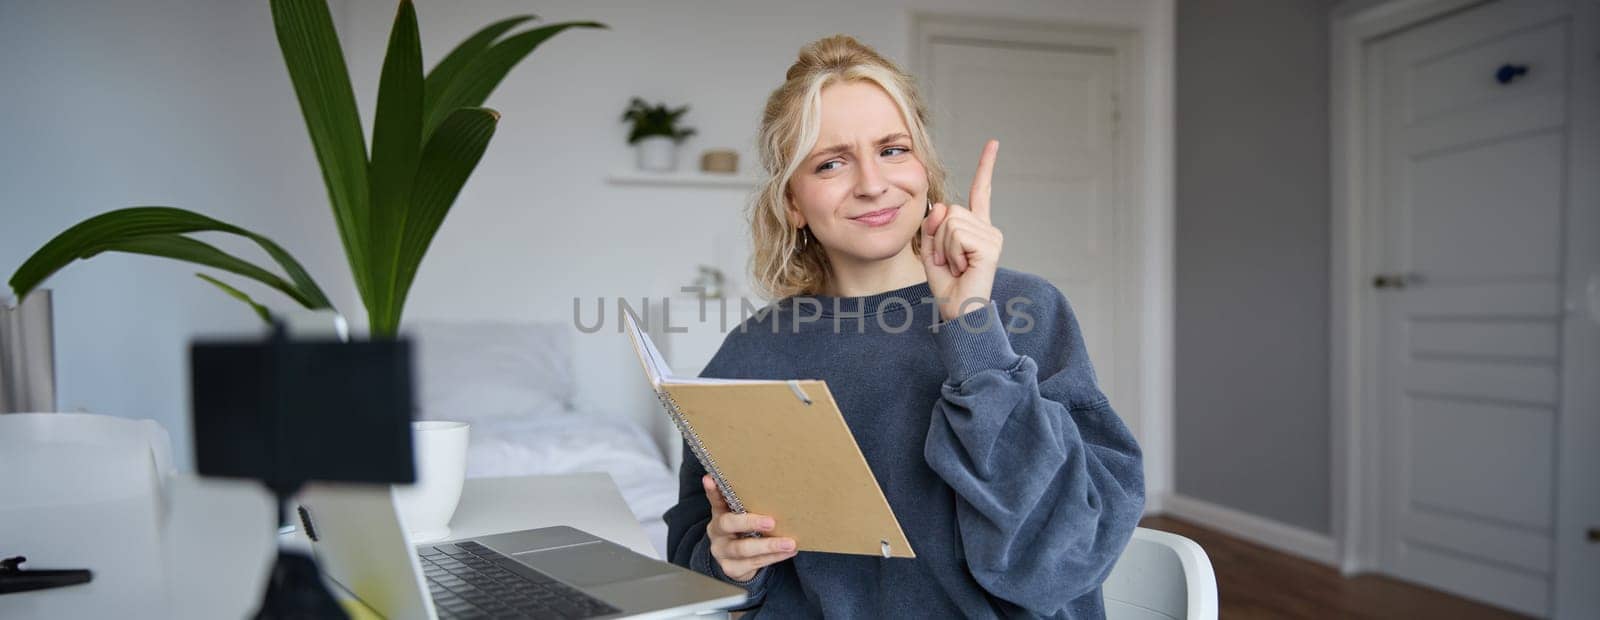 Portrait of young creative woman, content maker, sitting in room, working from home, using laptop, holding notebook, raising finger, has an idea, eureka gesture.